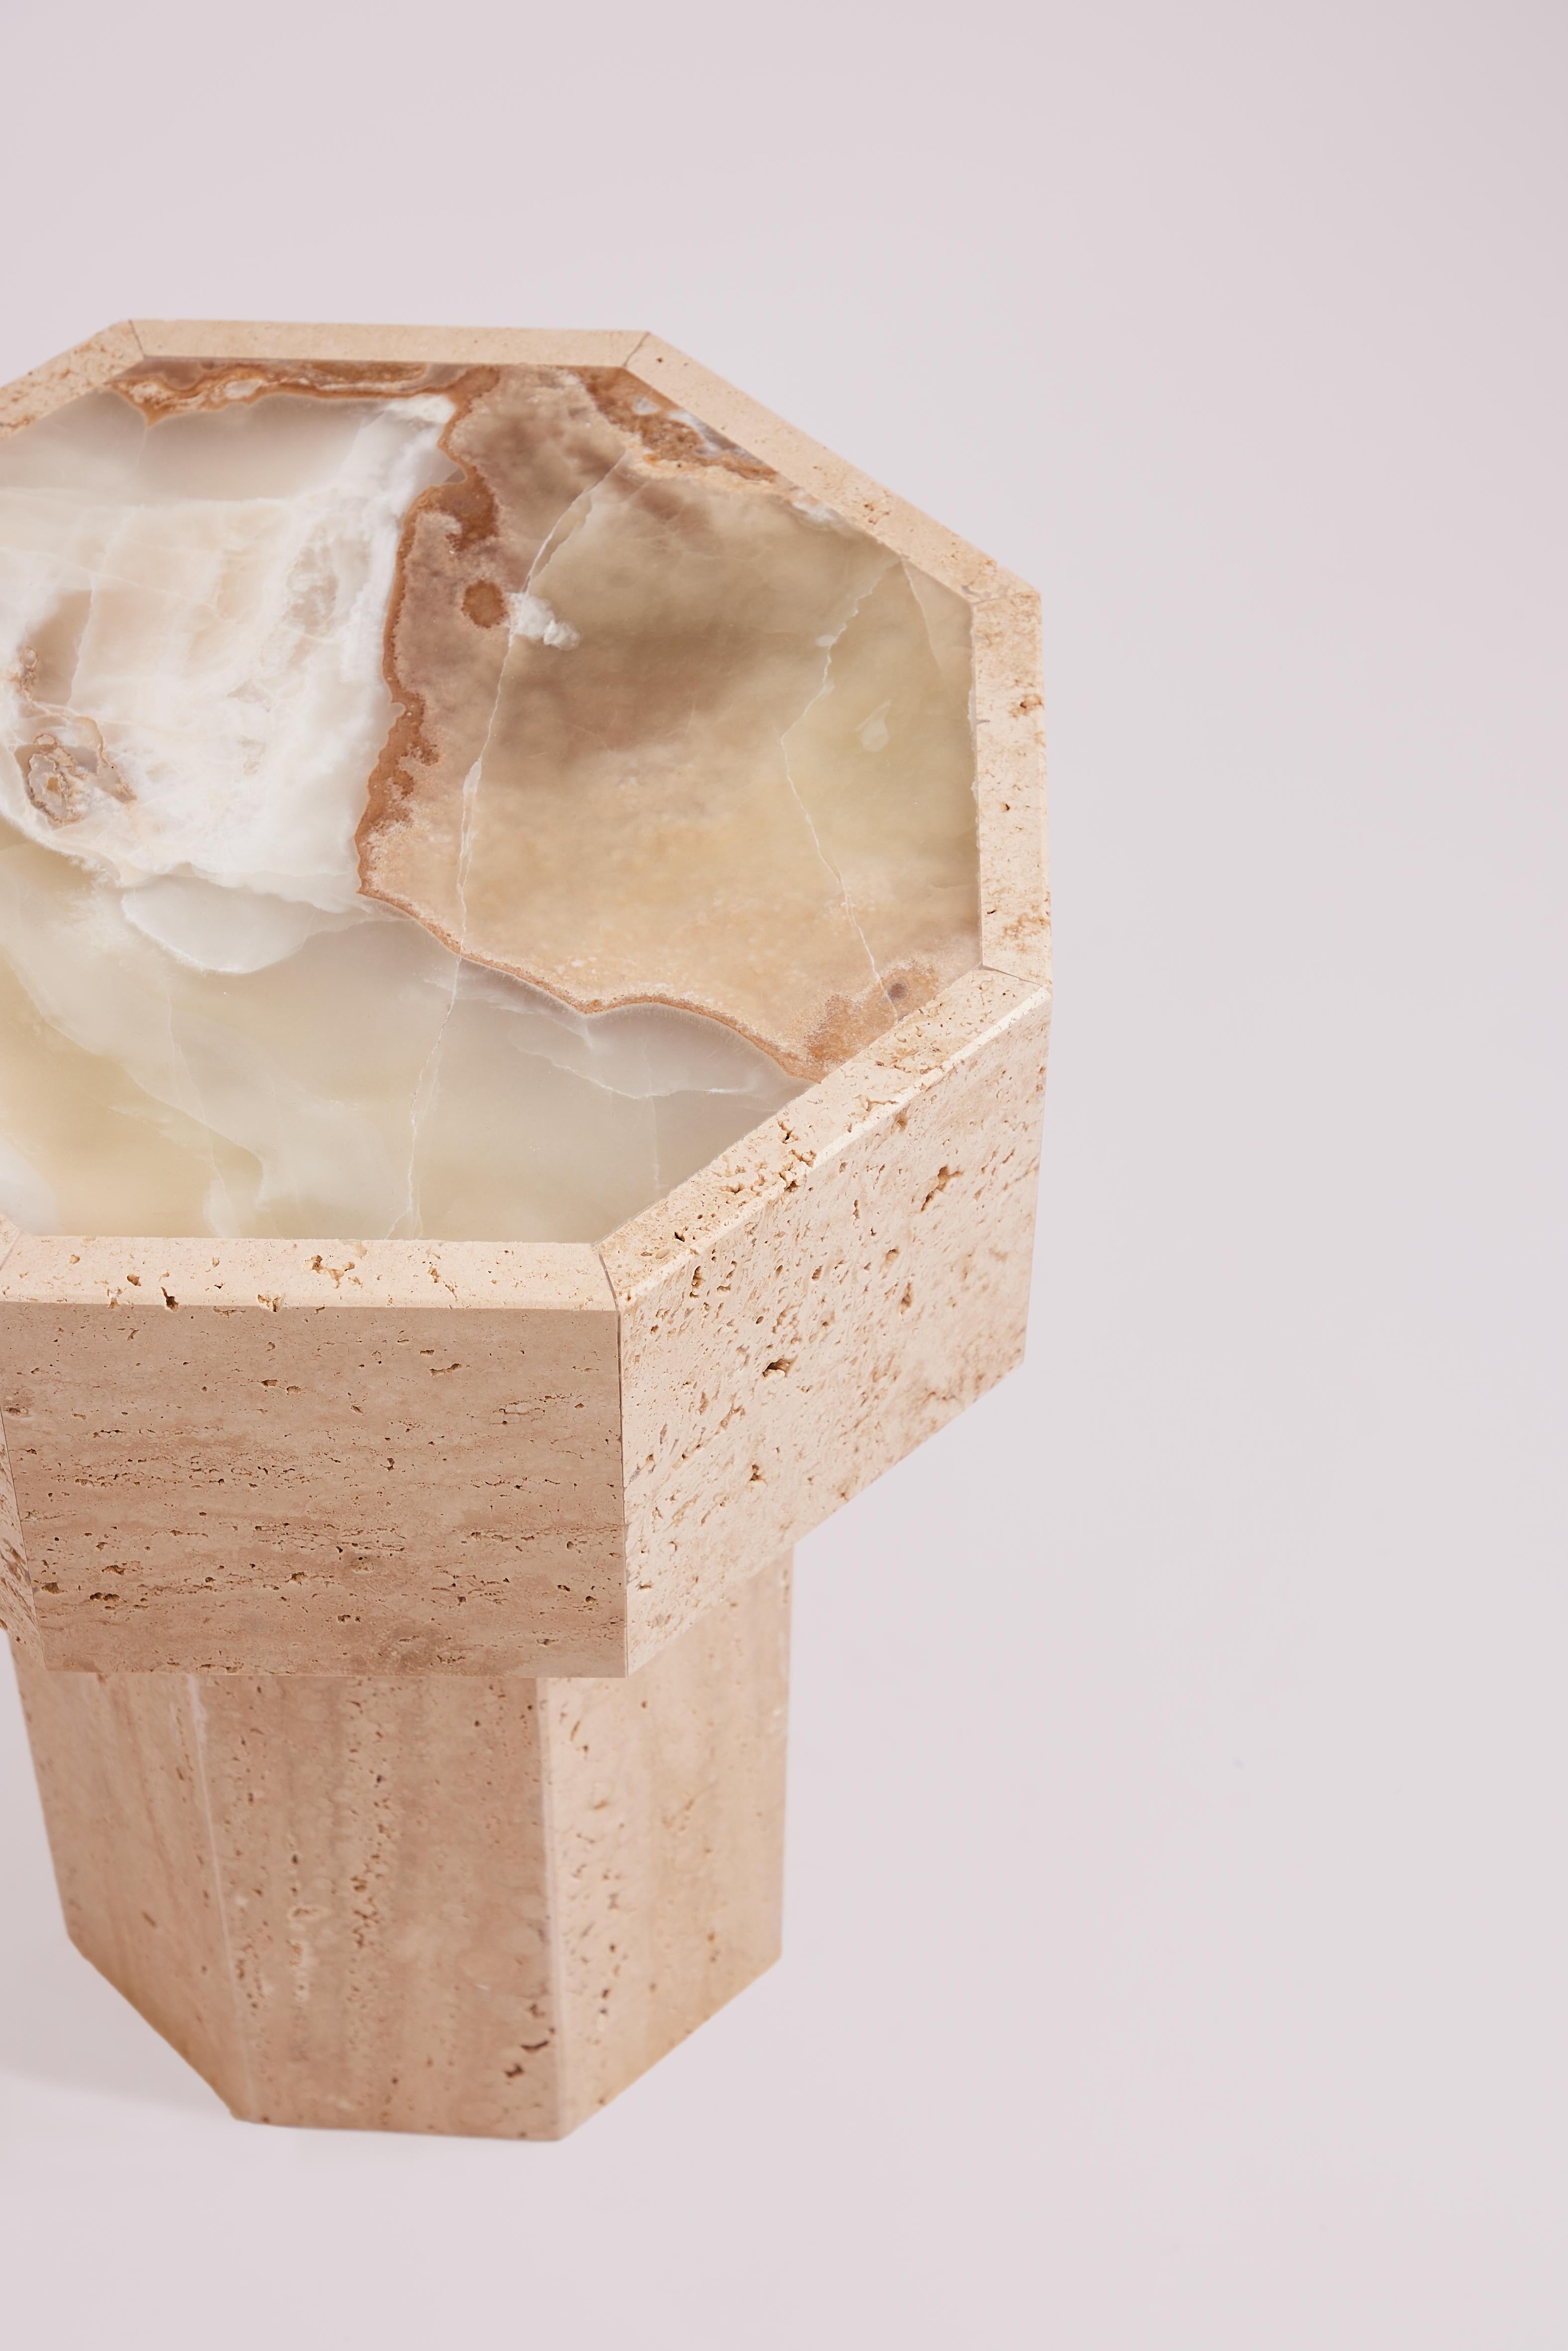 The Gisèle side table, in onyx and travertine, features two types of natural stones renowned for their unique beauty and durable properties.

The Gisèle side table embodies the combination of natural elegance and innovative design. She fuses fine